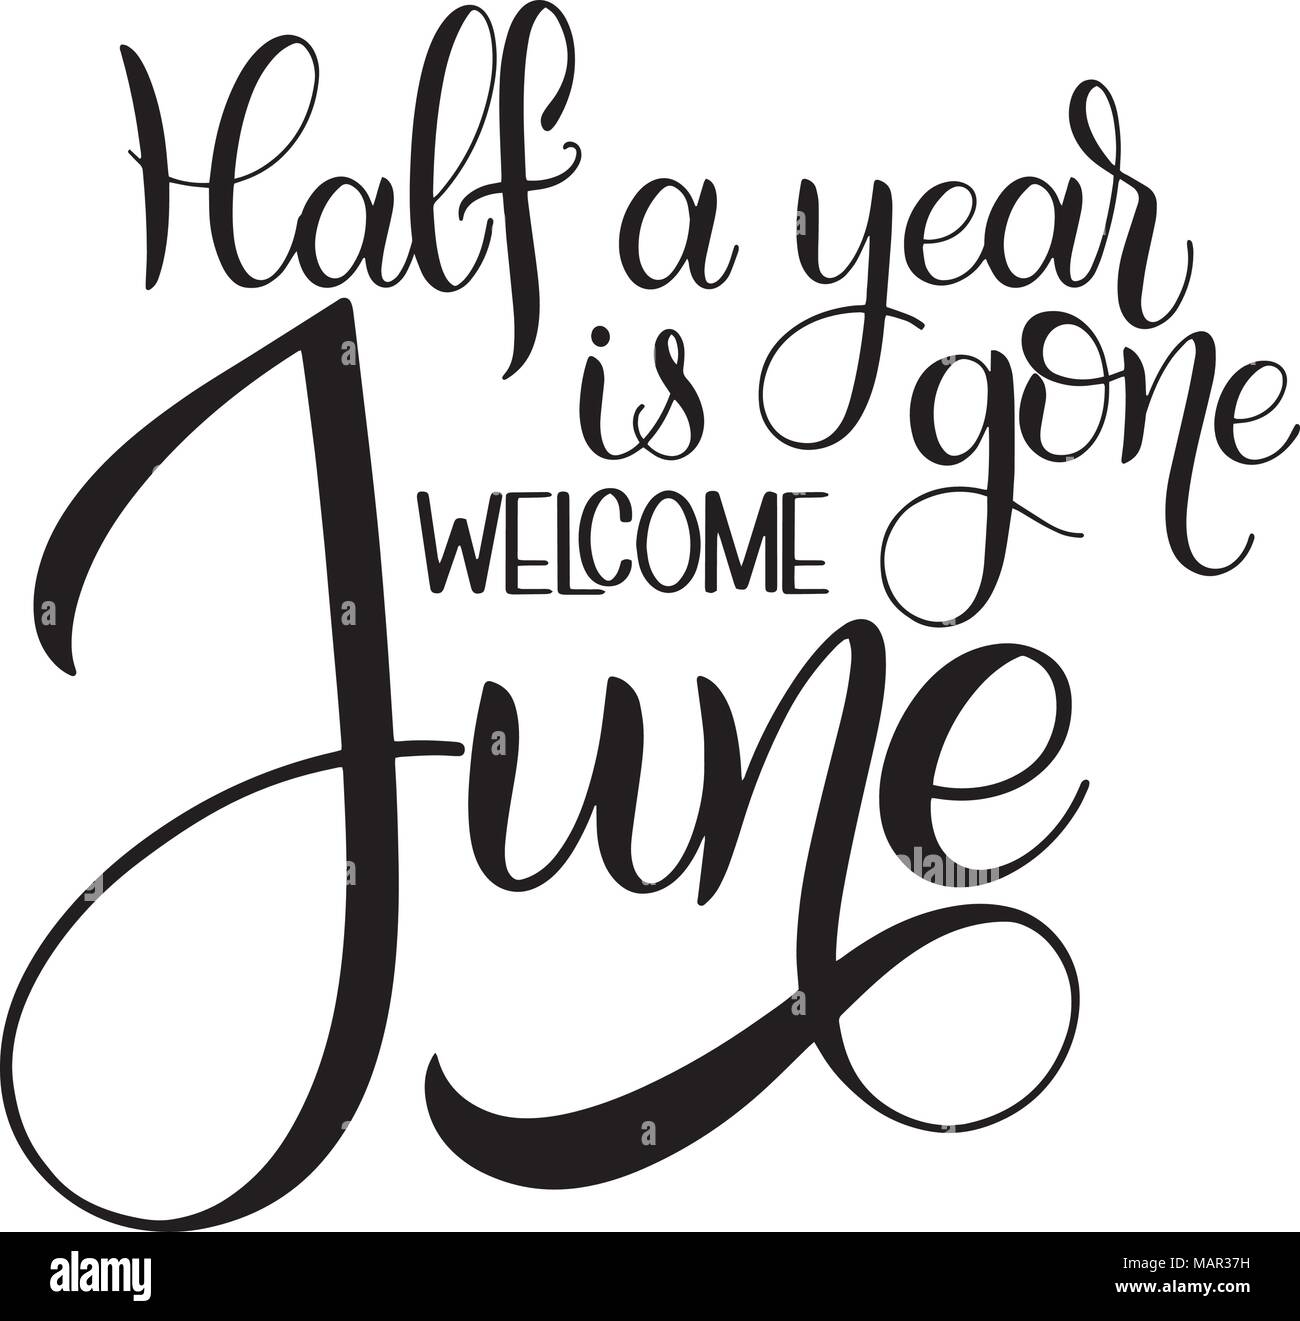 Half a year is gone, june. Hello June lettering. Elements for